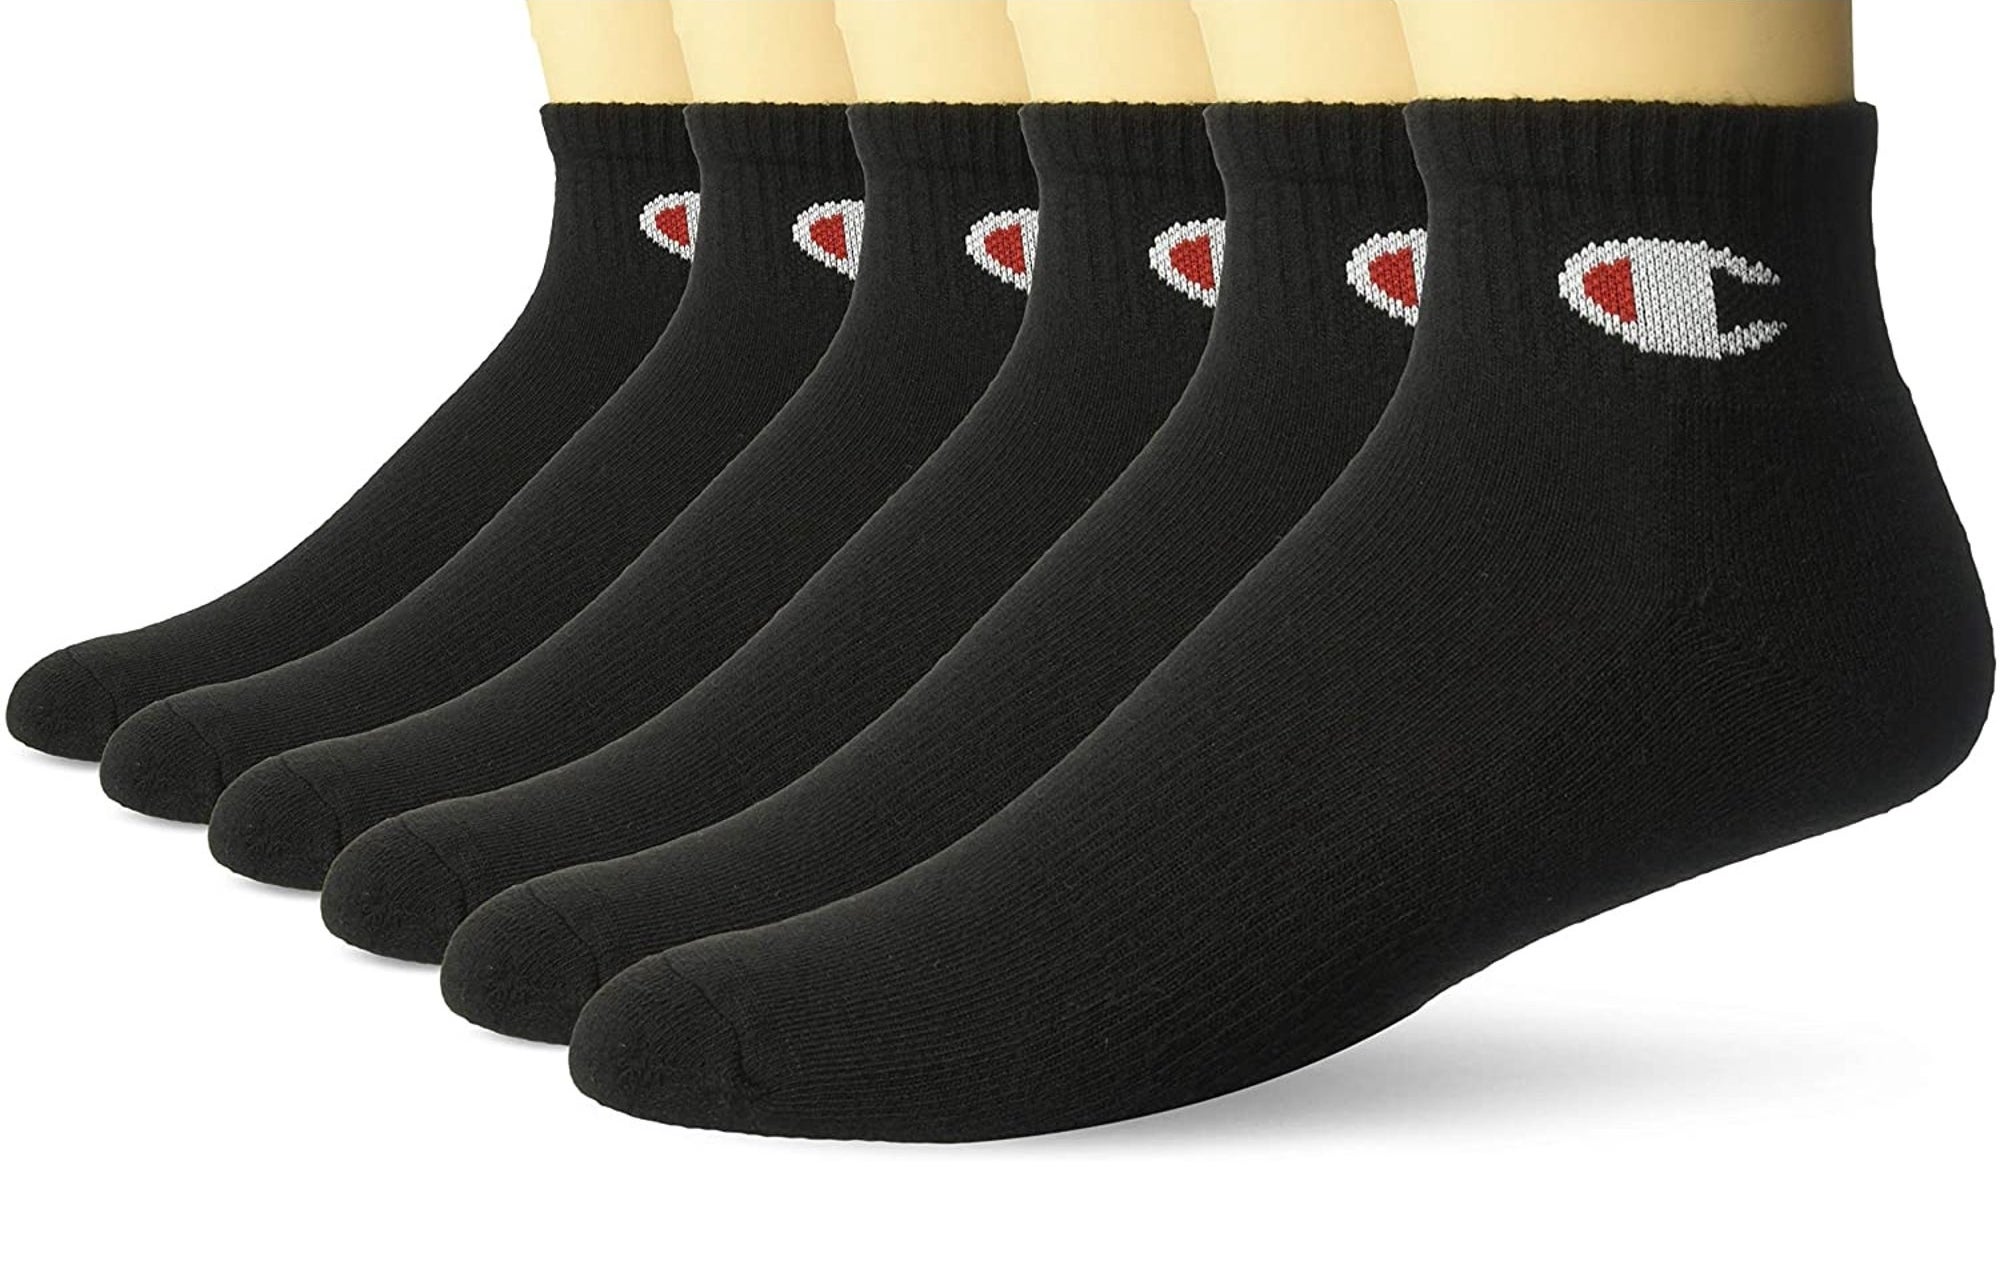 Six matching socks in a row